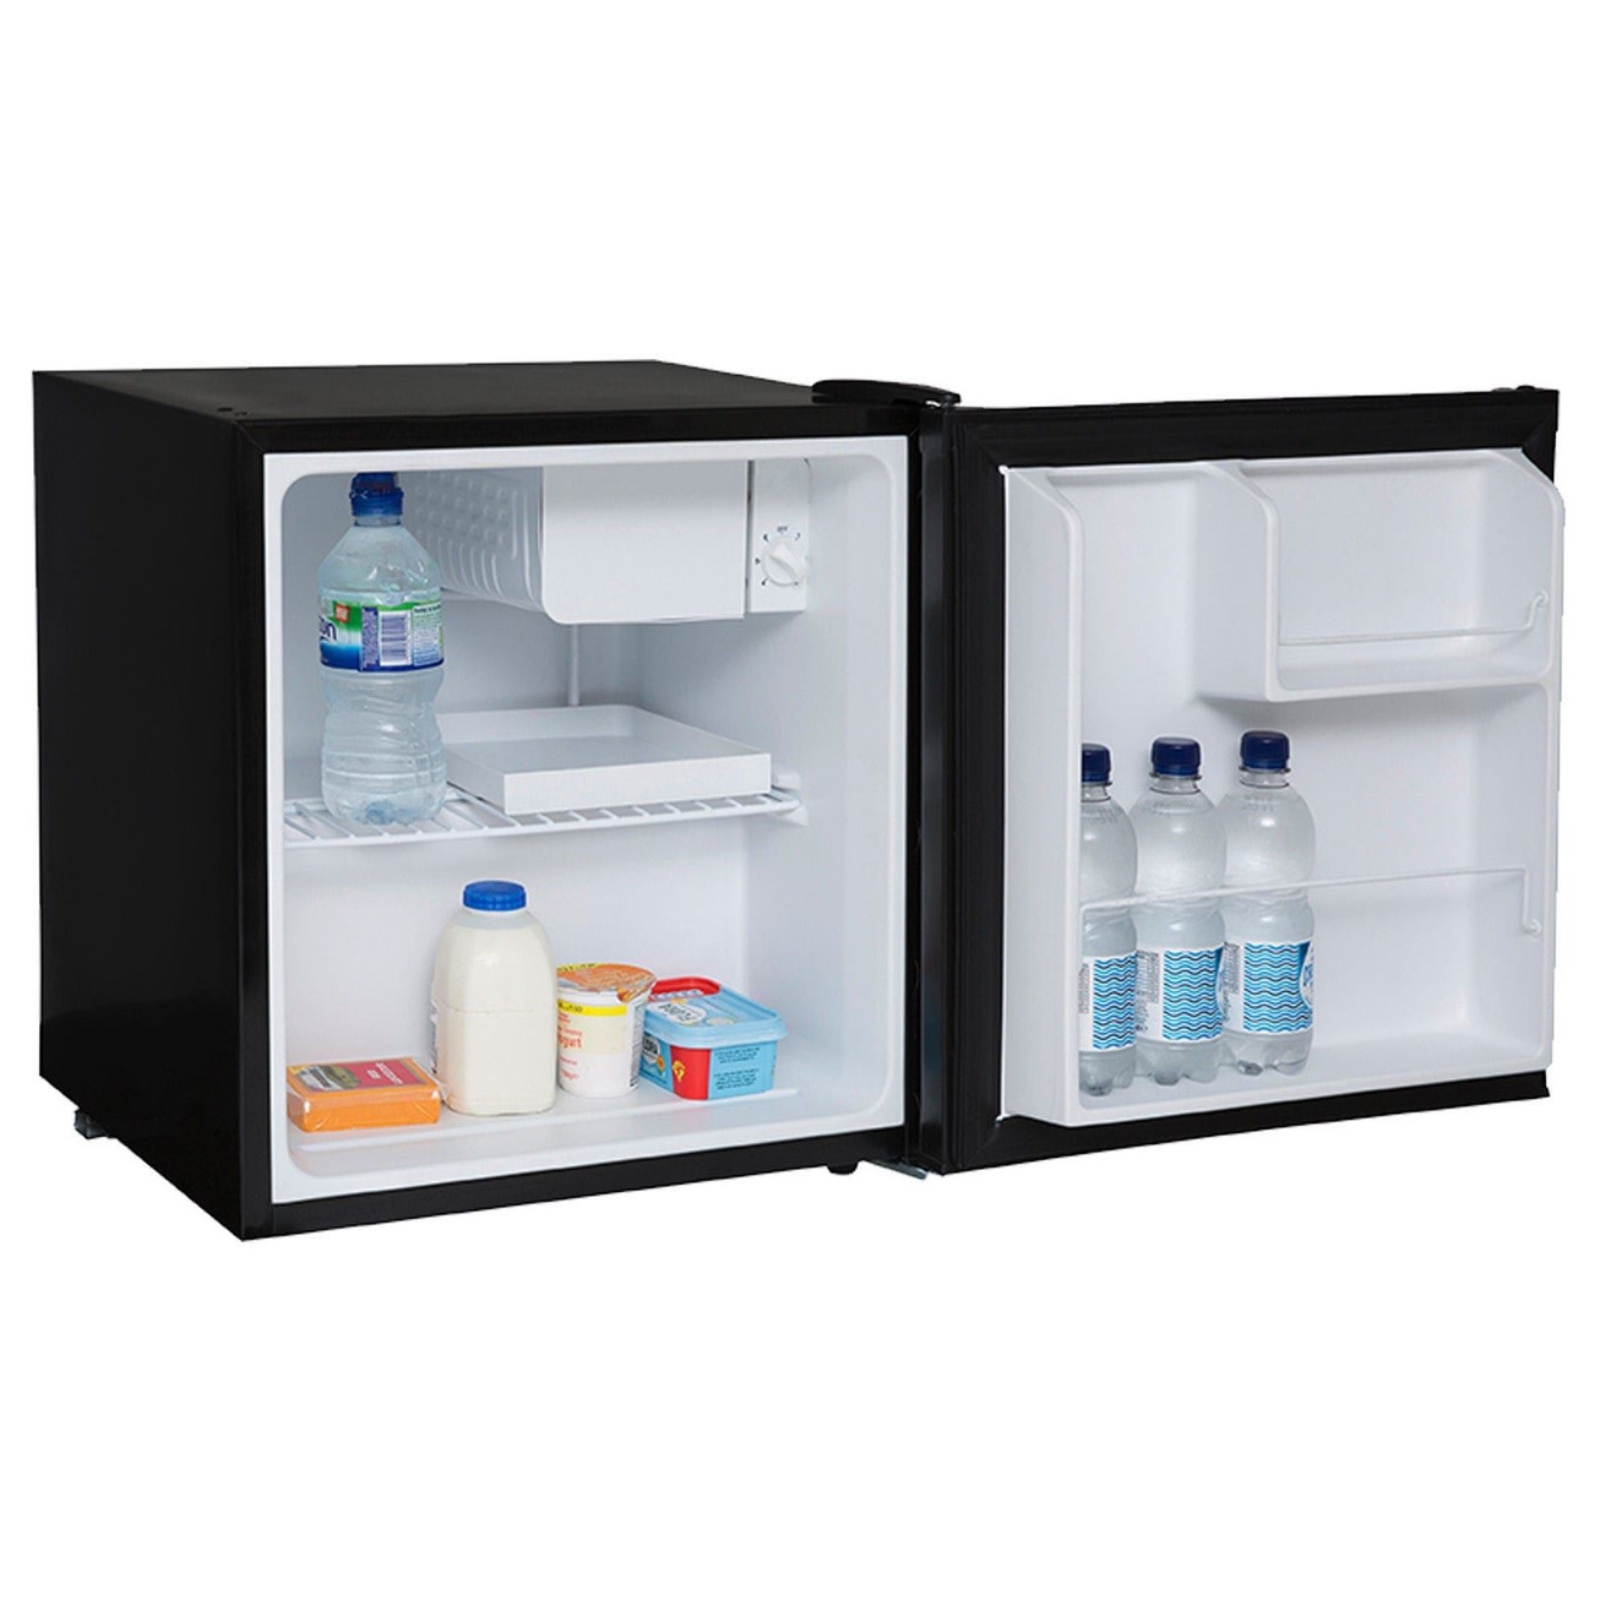 SIA TT01BL 49L Mini Fridge With Ice Box In Black, Beer and Drinks Cooler